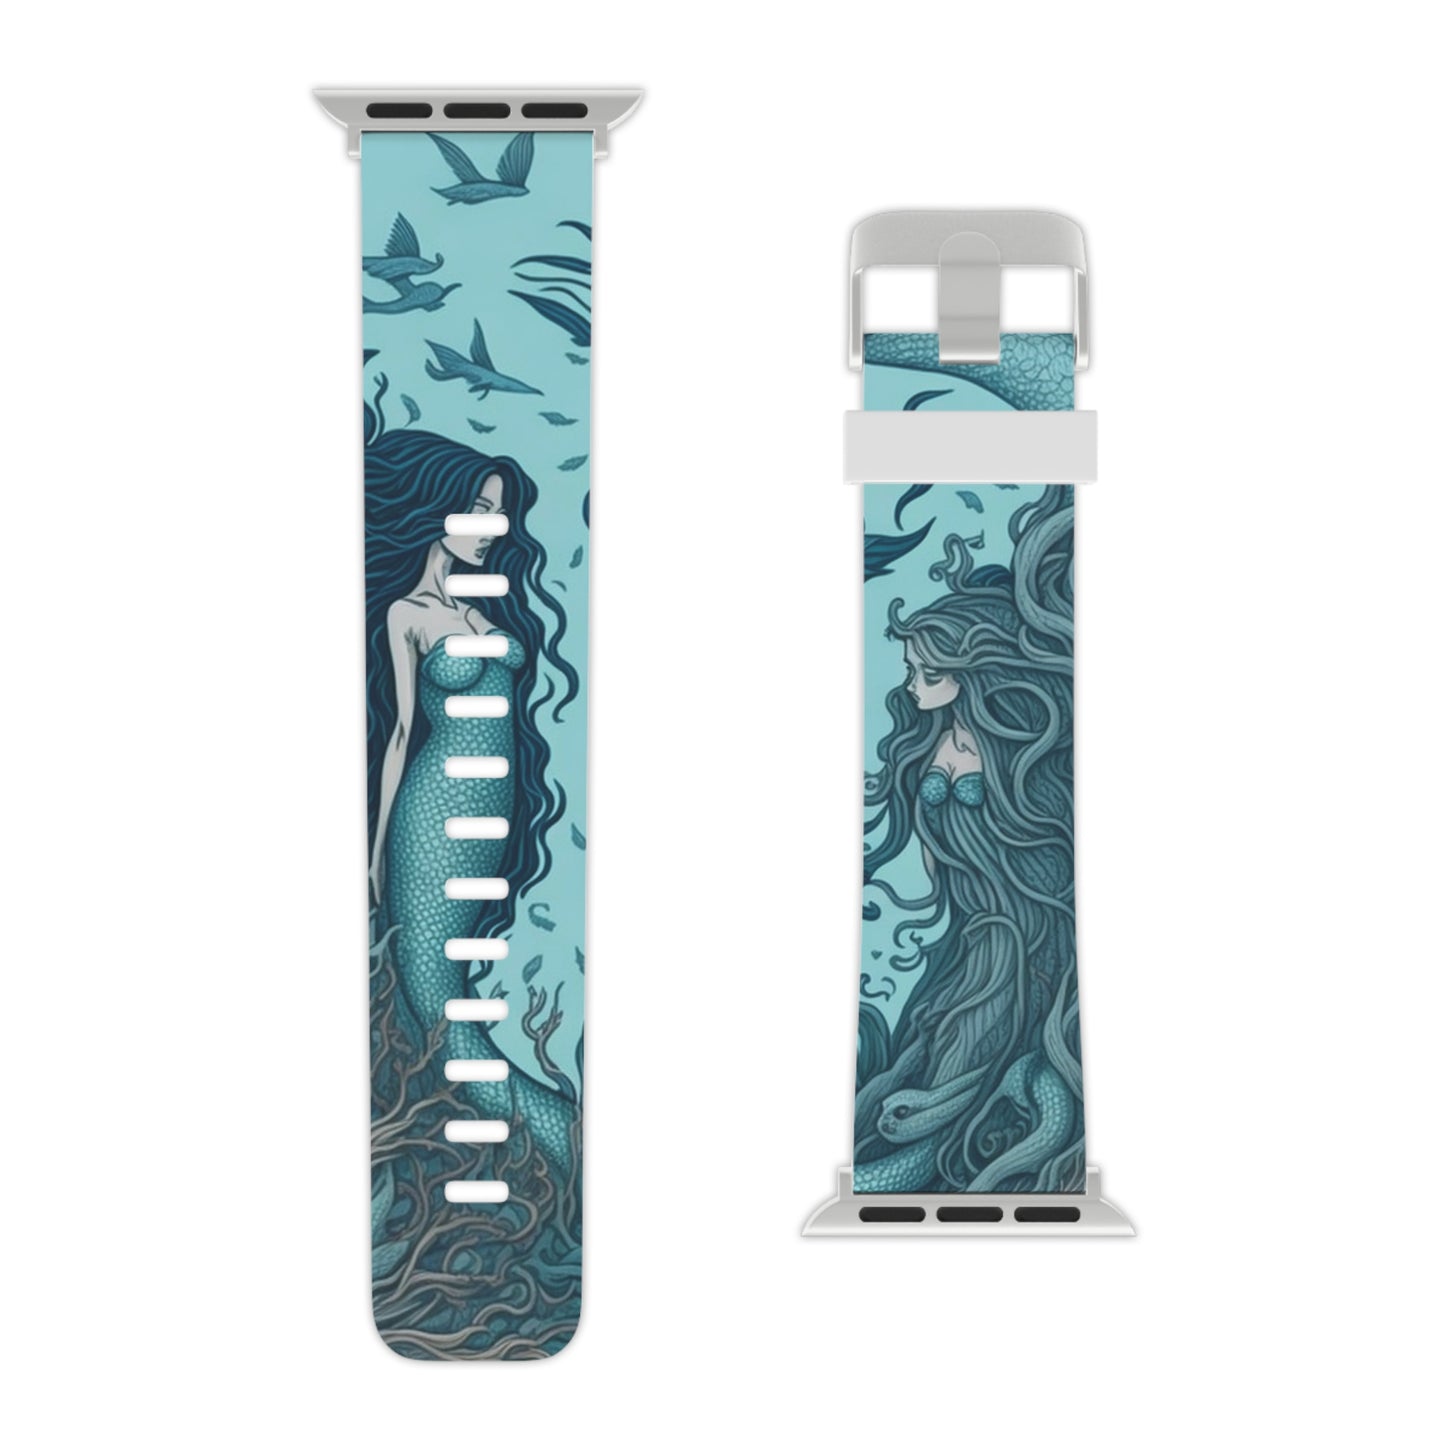 Mermaids Cove Watch Band for Apple Watch, Standard and Long Sizes available. Great gift for any sea or ocean lover. Dive, Teacher, Student